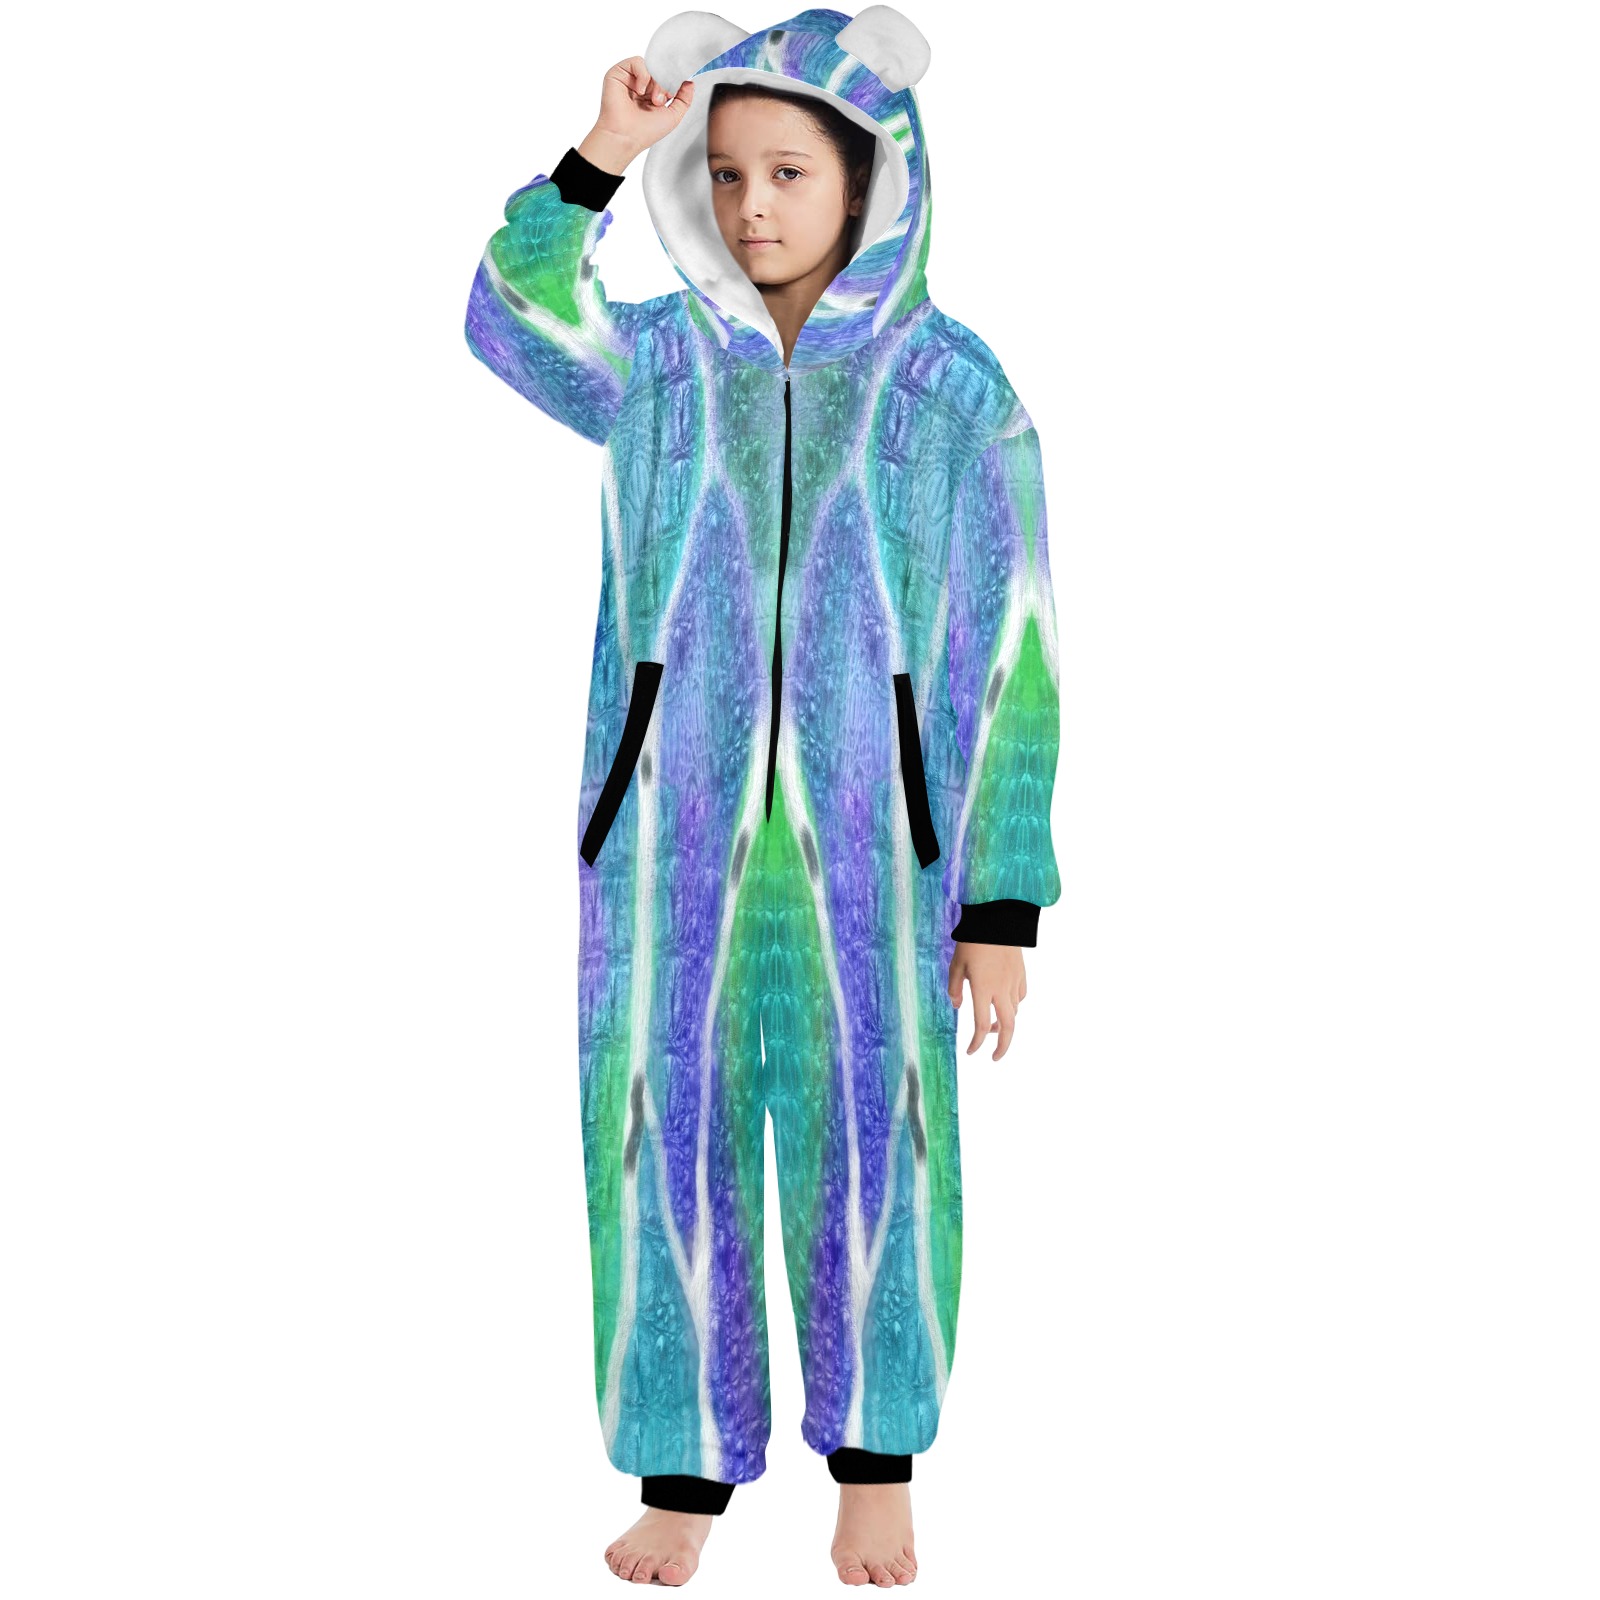 nidhi spet 2018-6 One-Piece Zip Up Hooded Pajamas for Big Kids